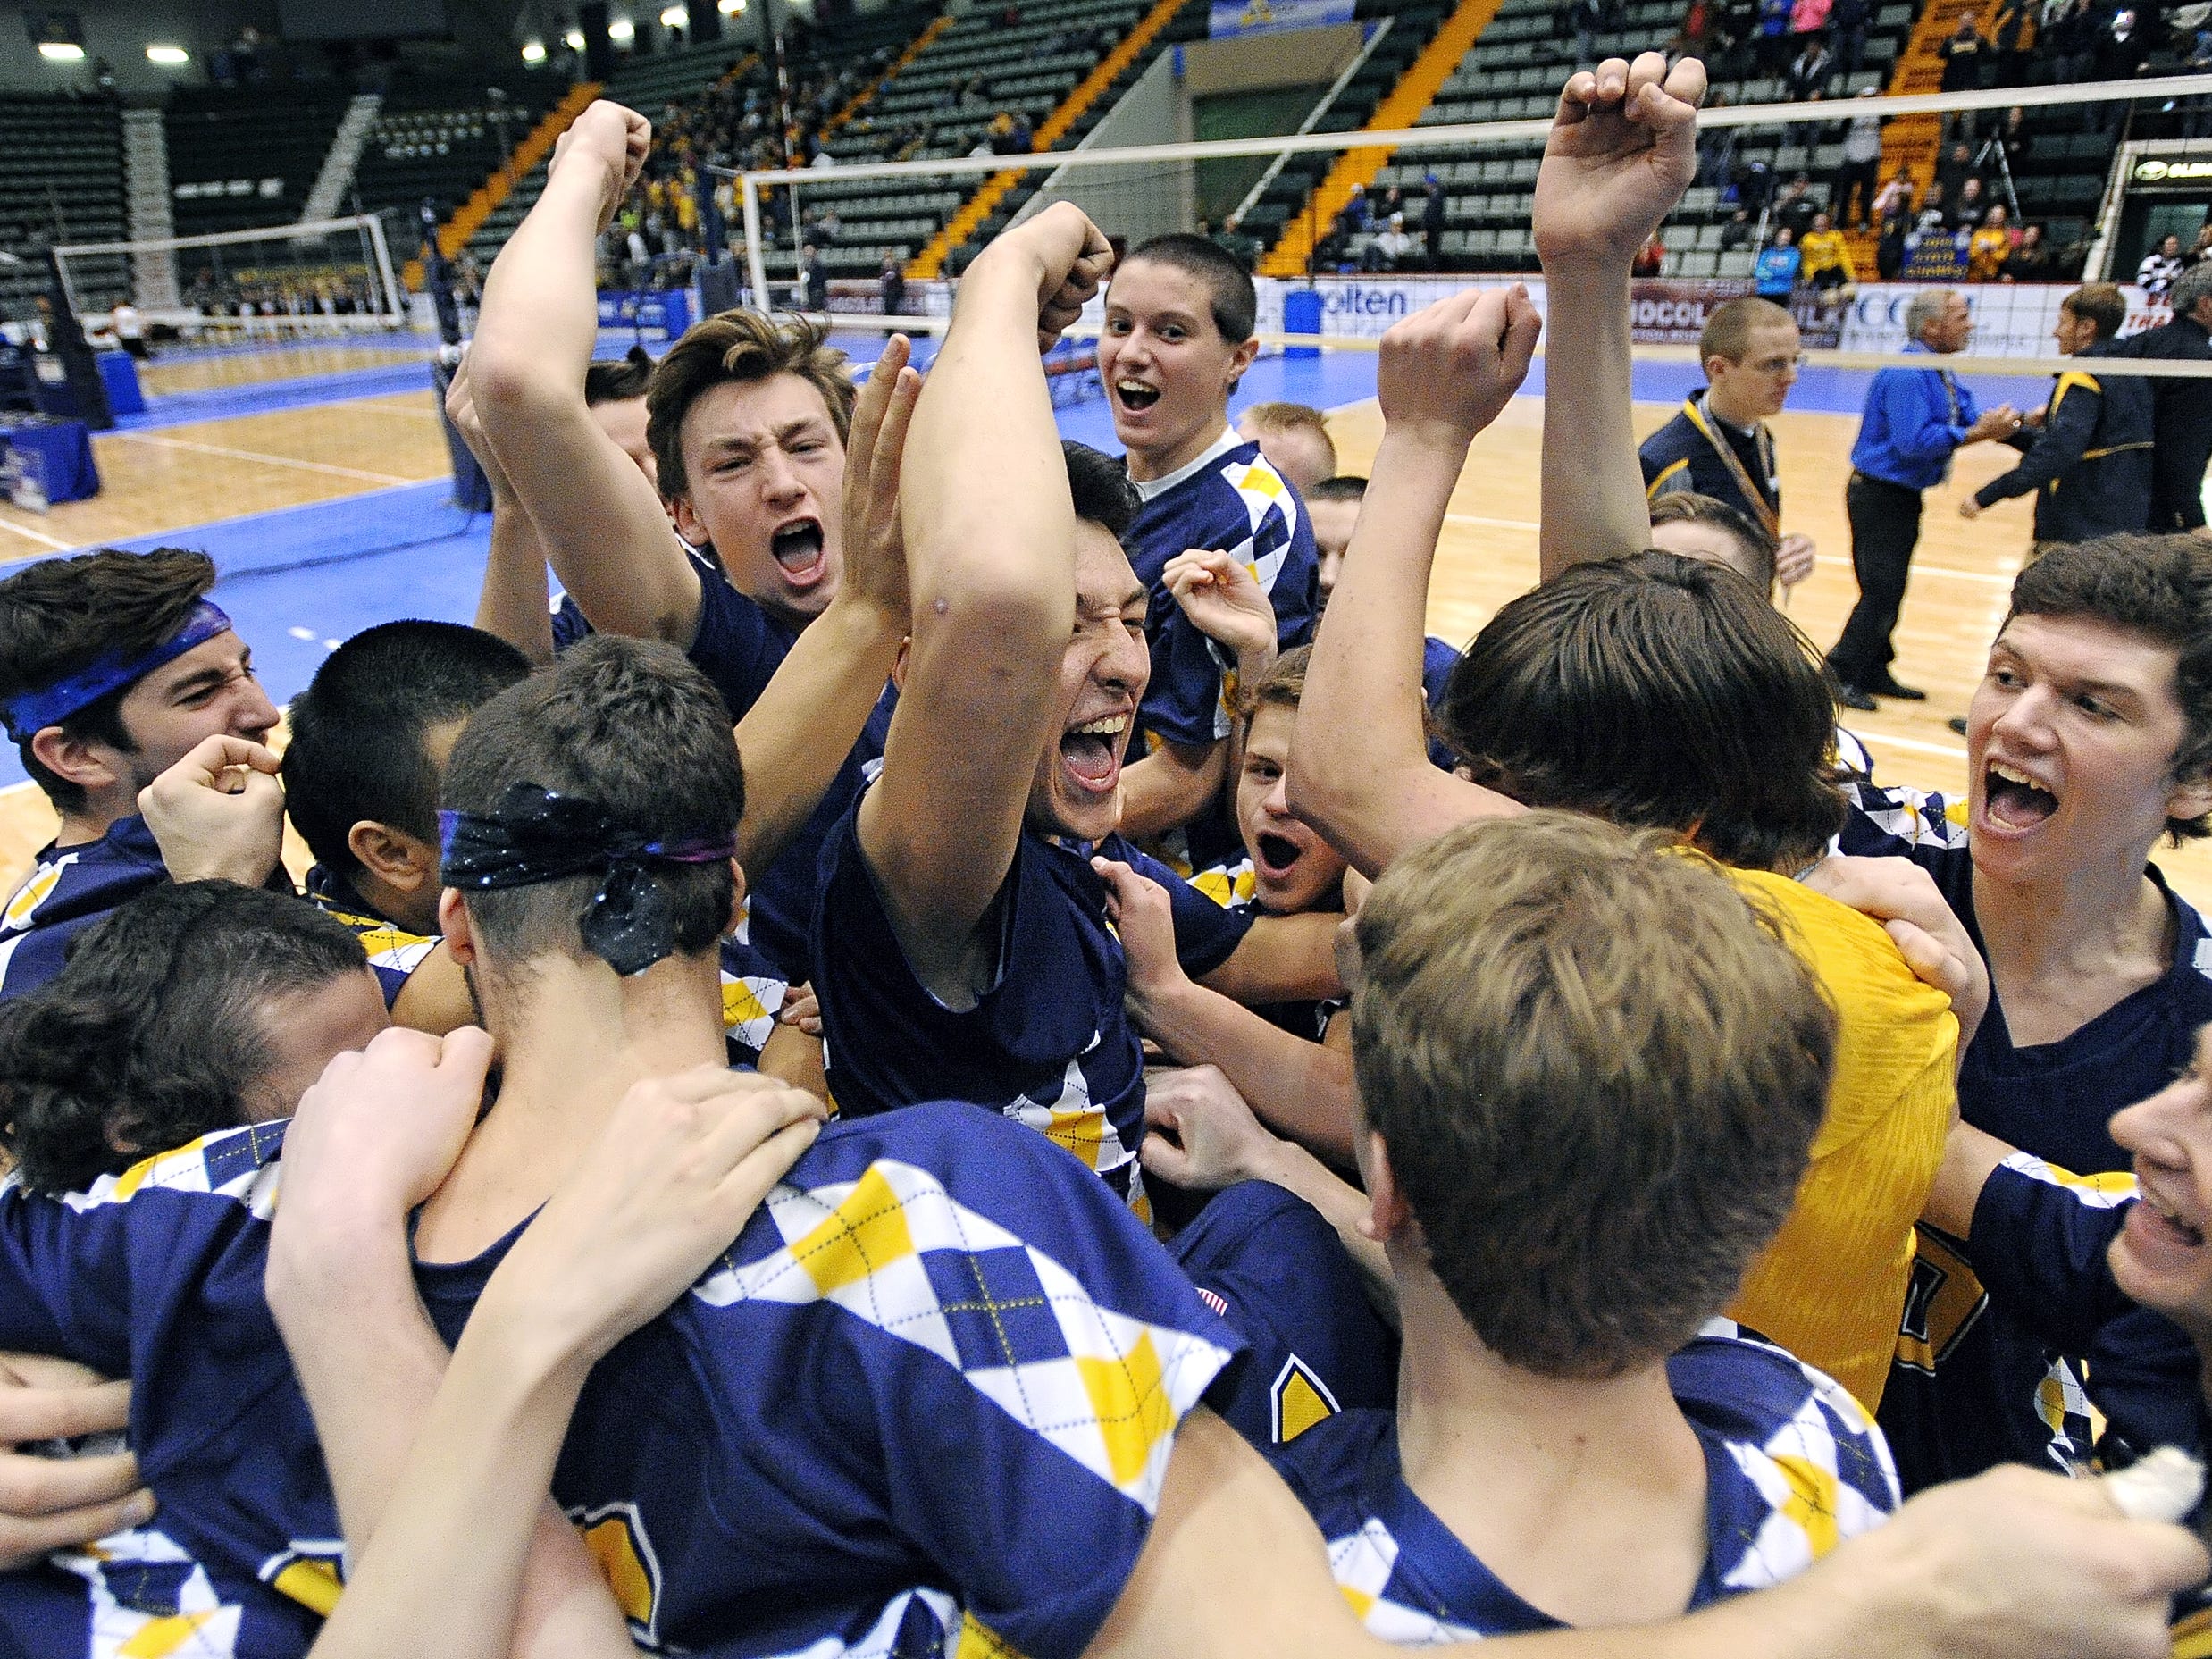 Victor wins NY boys volleyball title | USA TODAY High School Sports